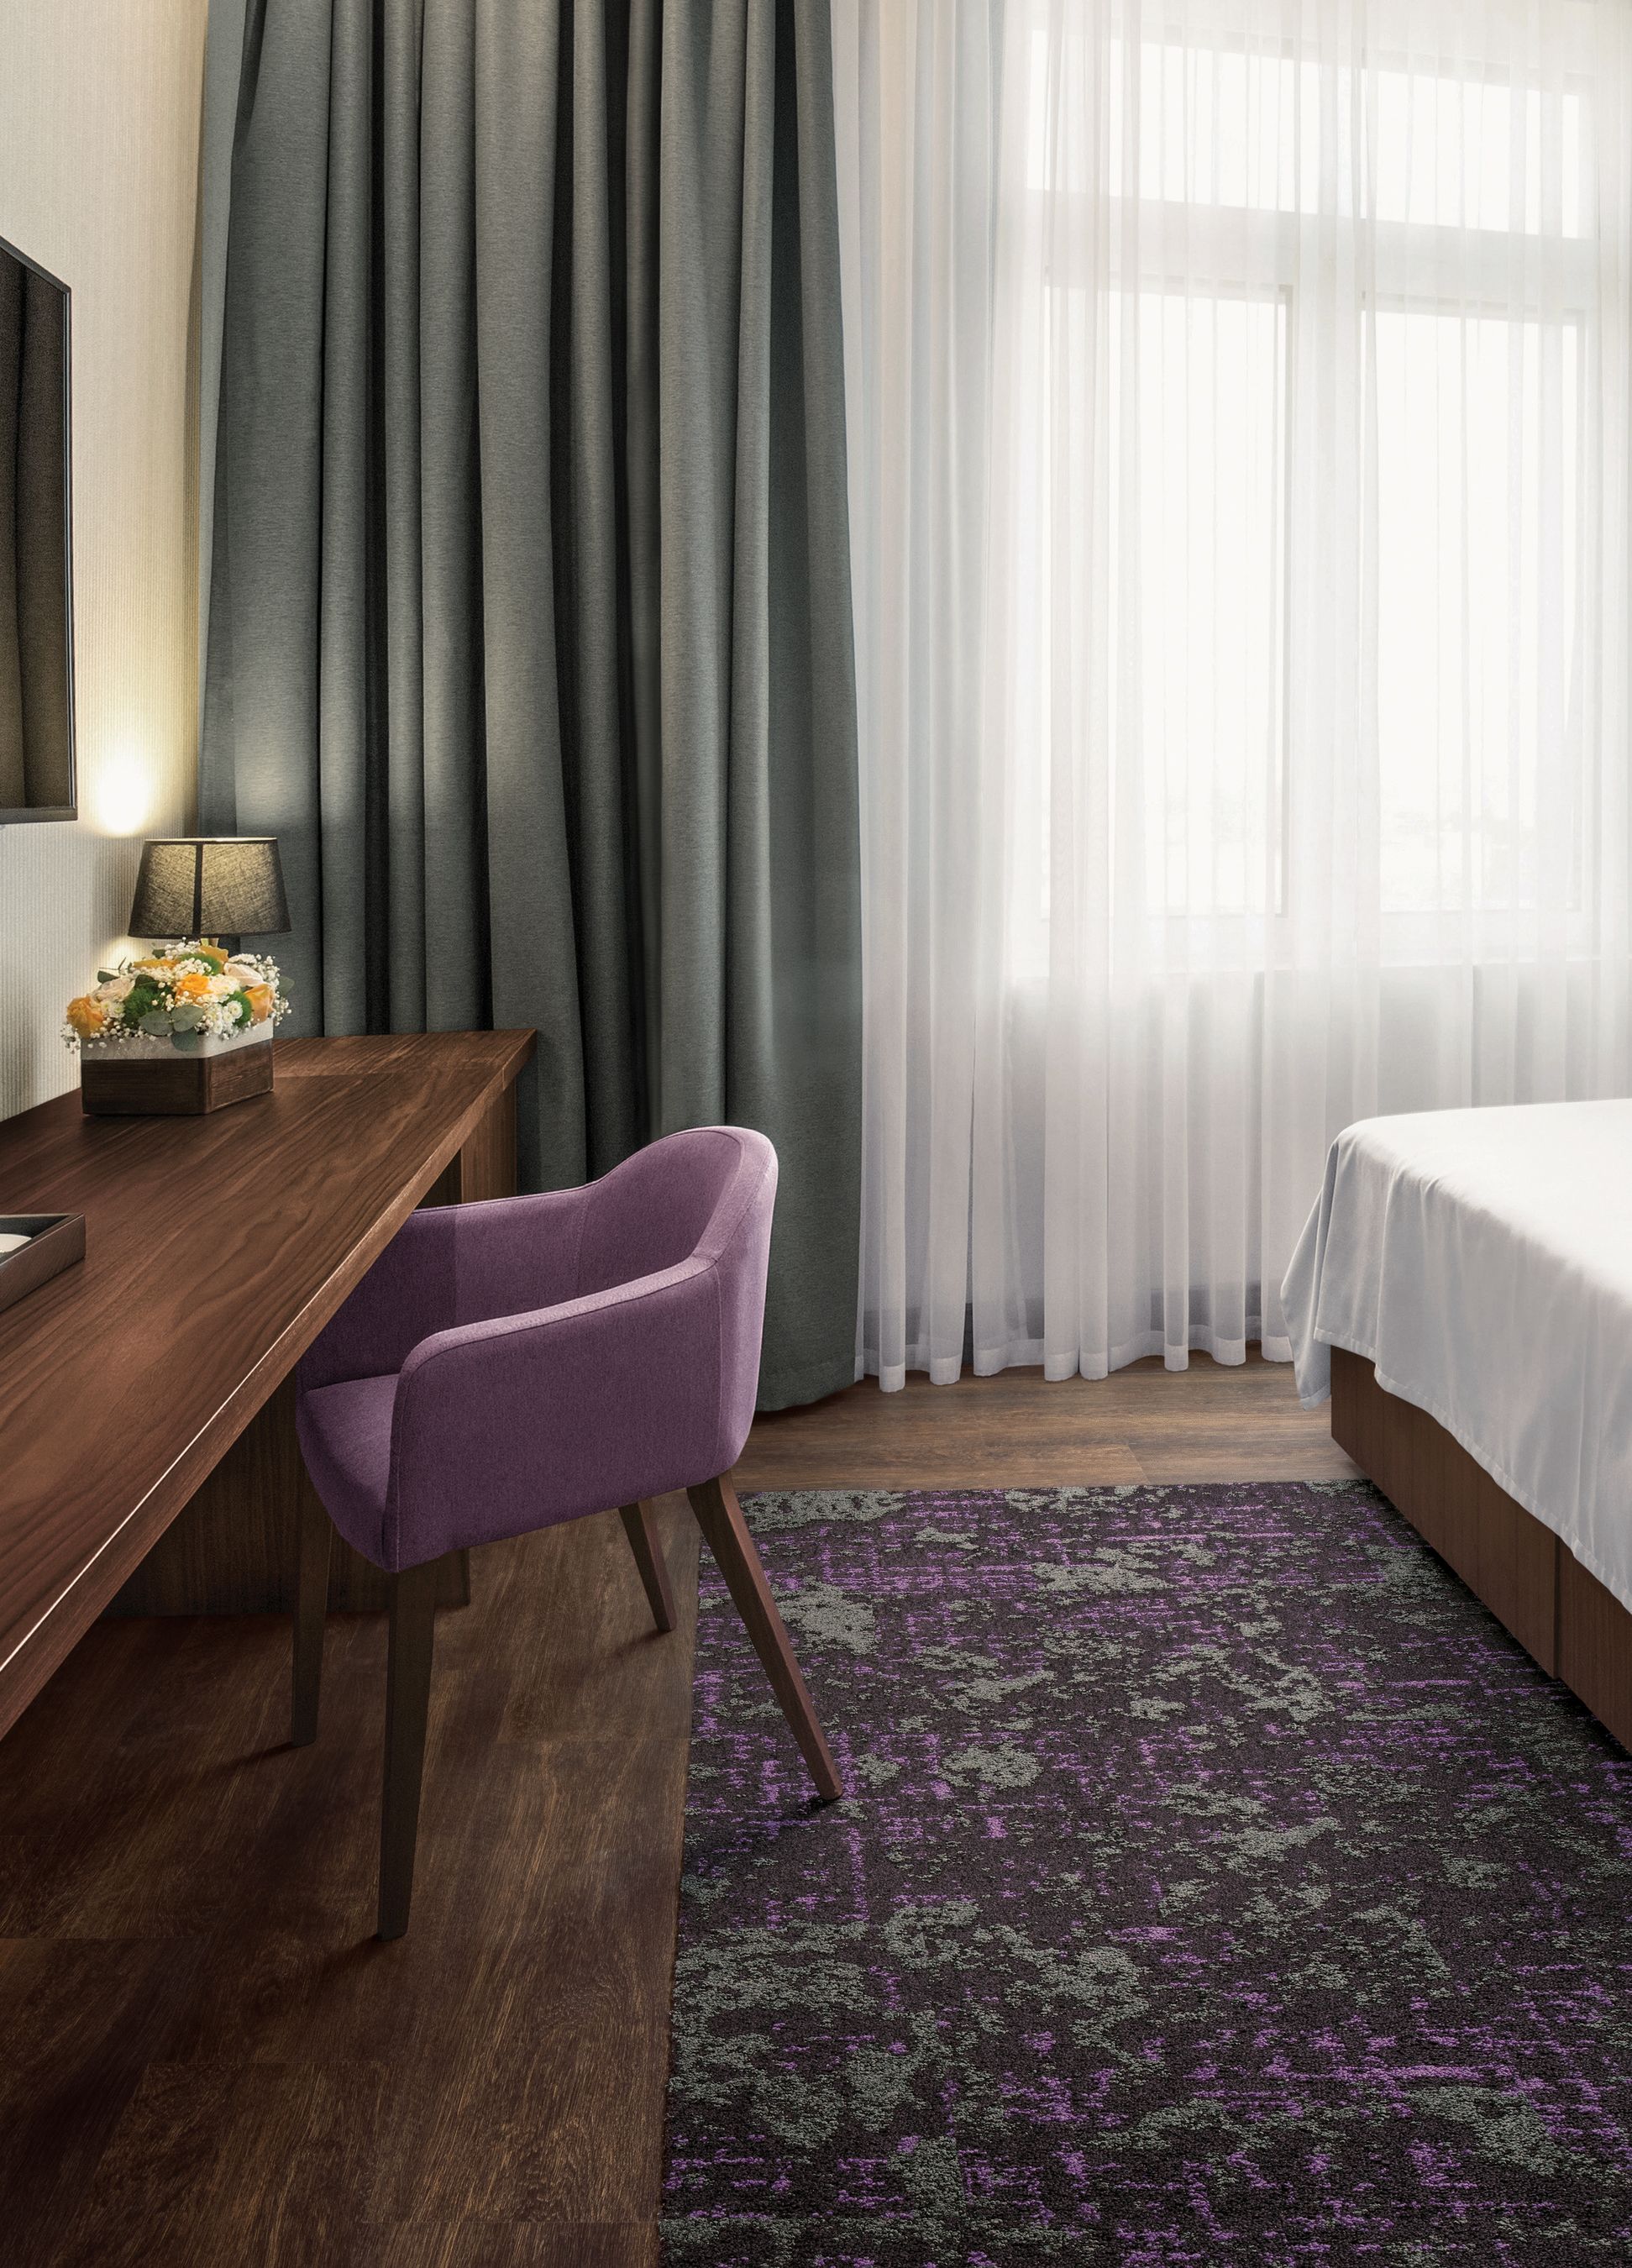 Interface Head in the Clouds carpet tile in hotel room with purple chair at desk imagen número 8